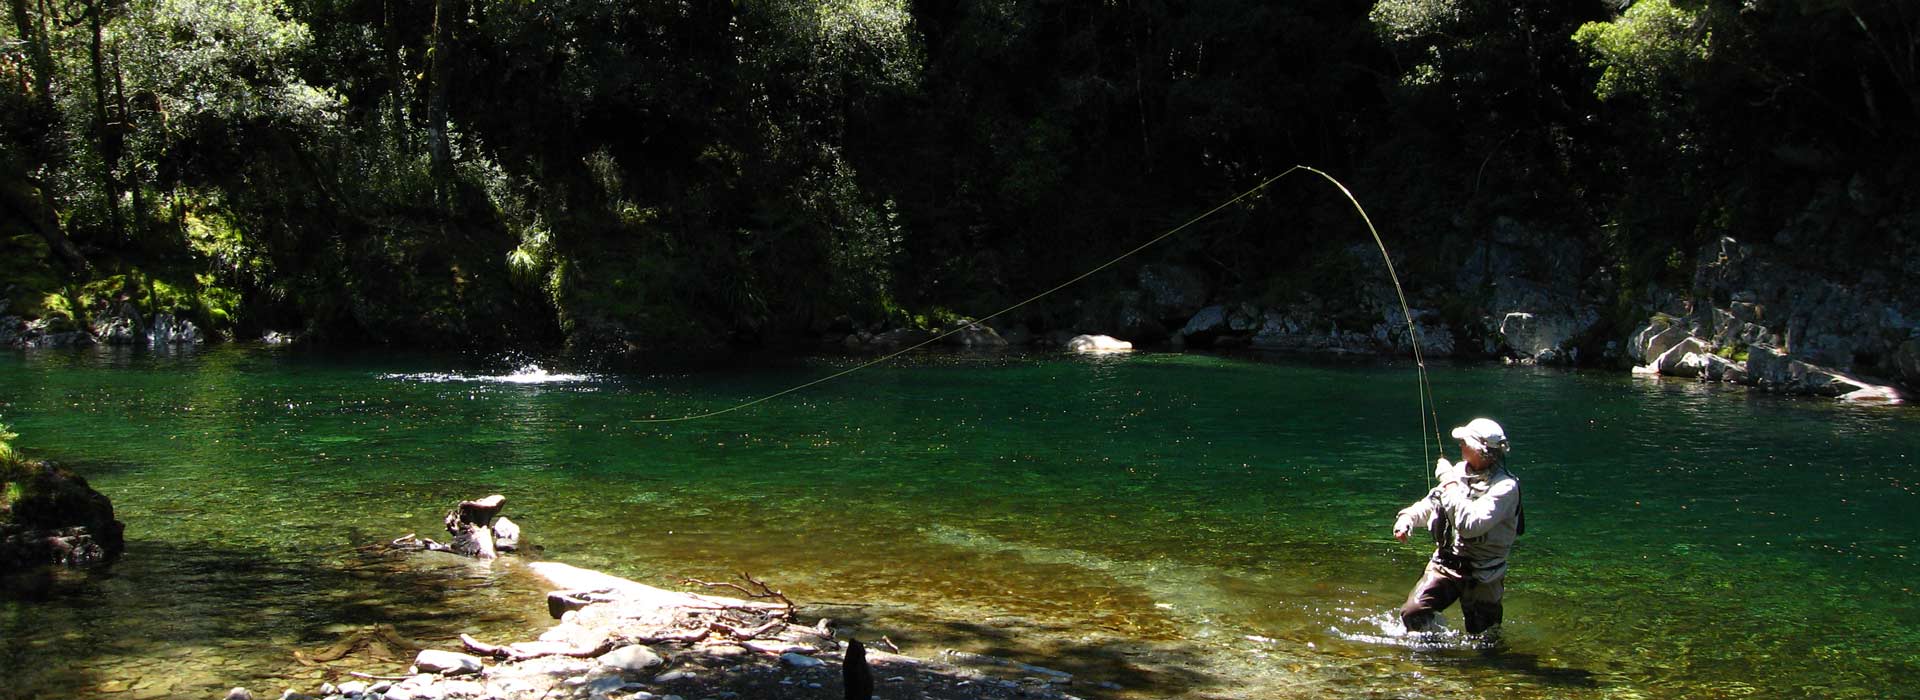 South Island trout fishing guide in New Zealand's 